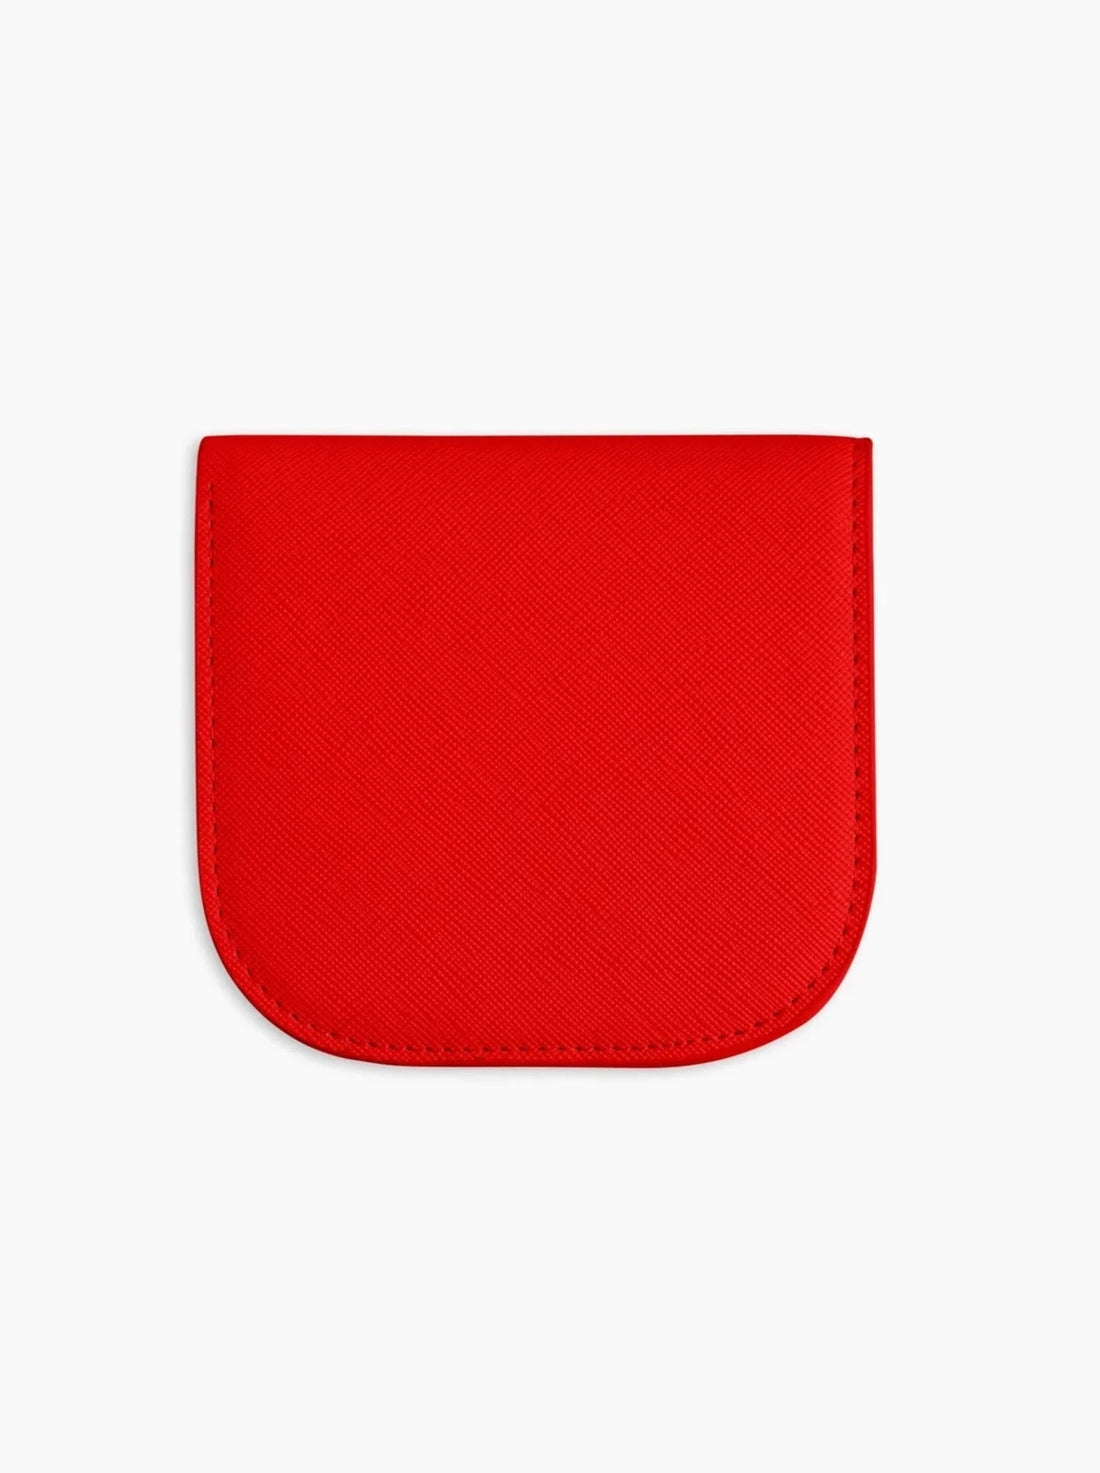 Dome Wallet - Red